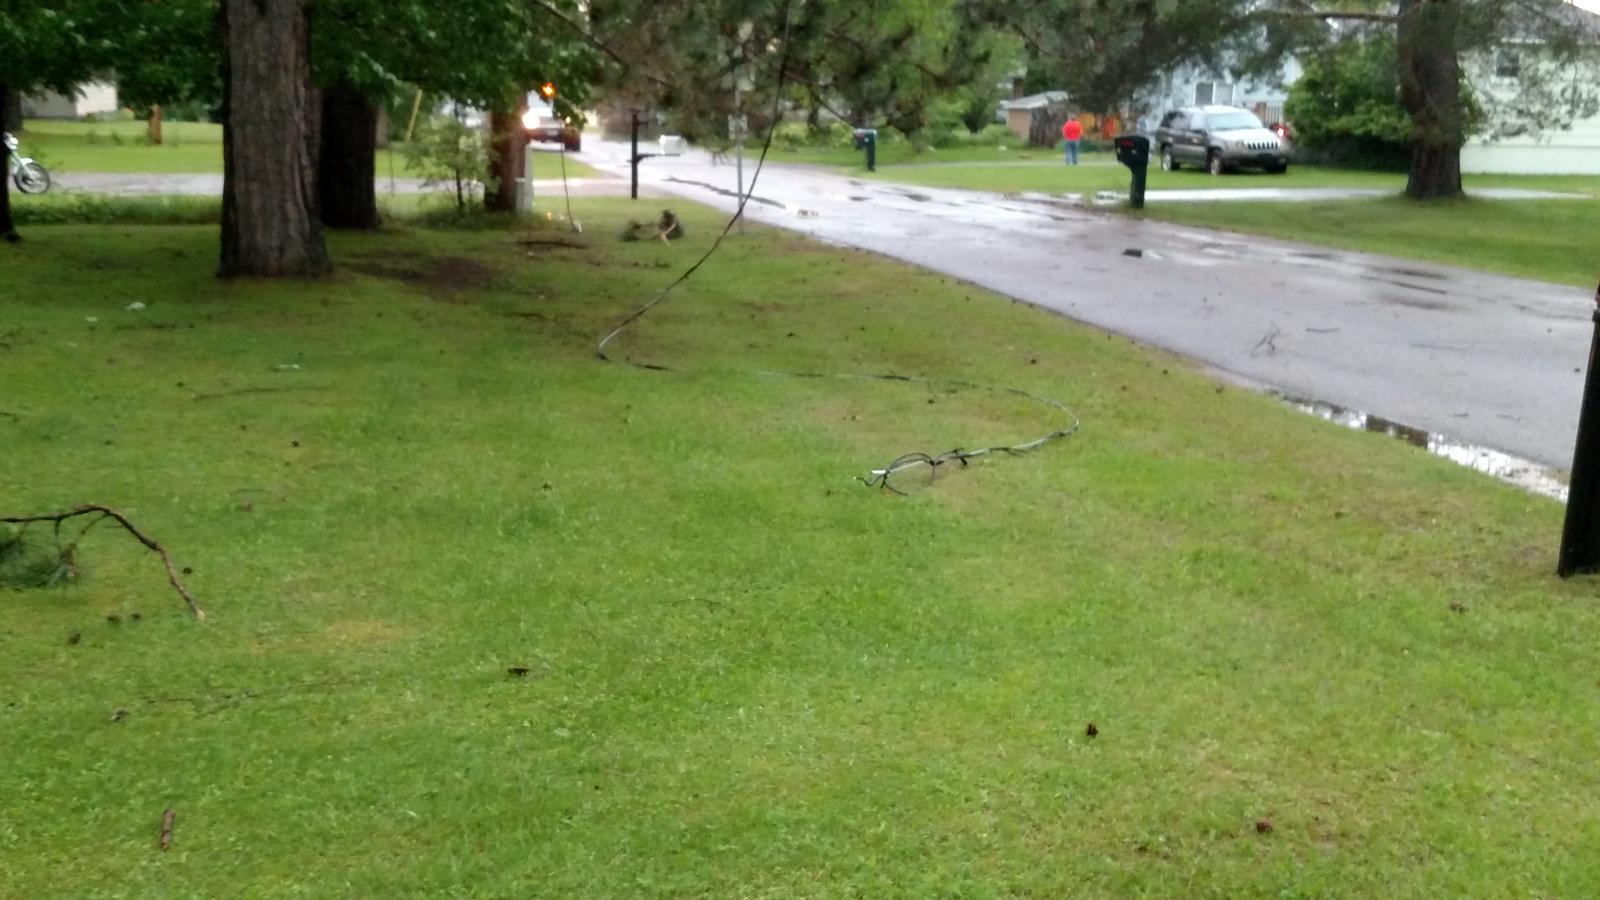 Downed lines in our front lawn